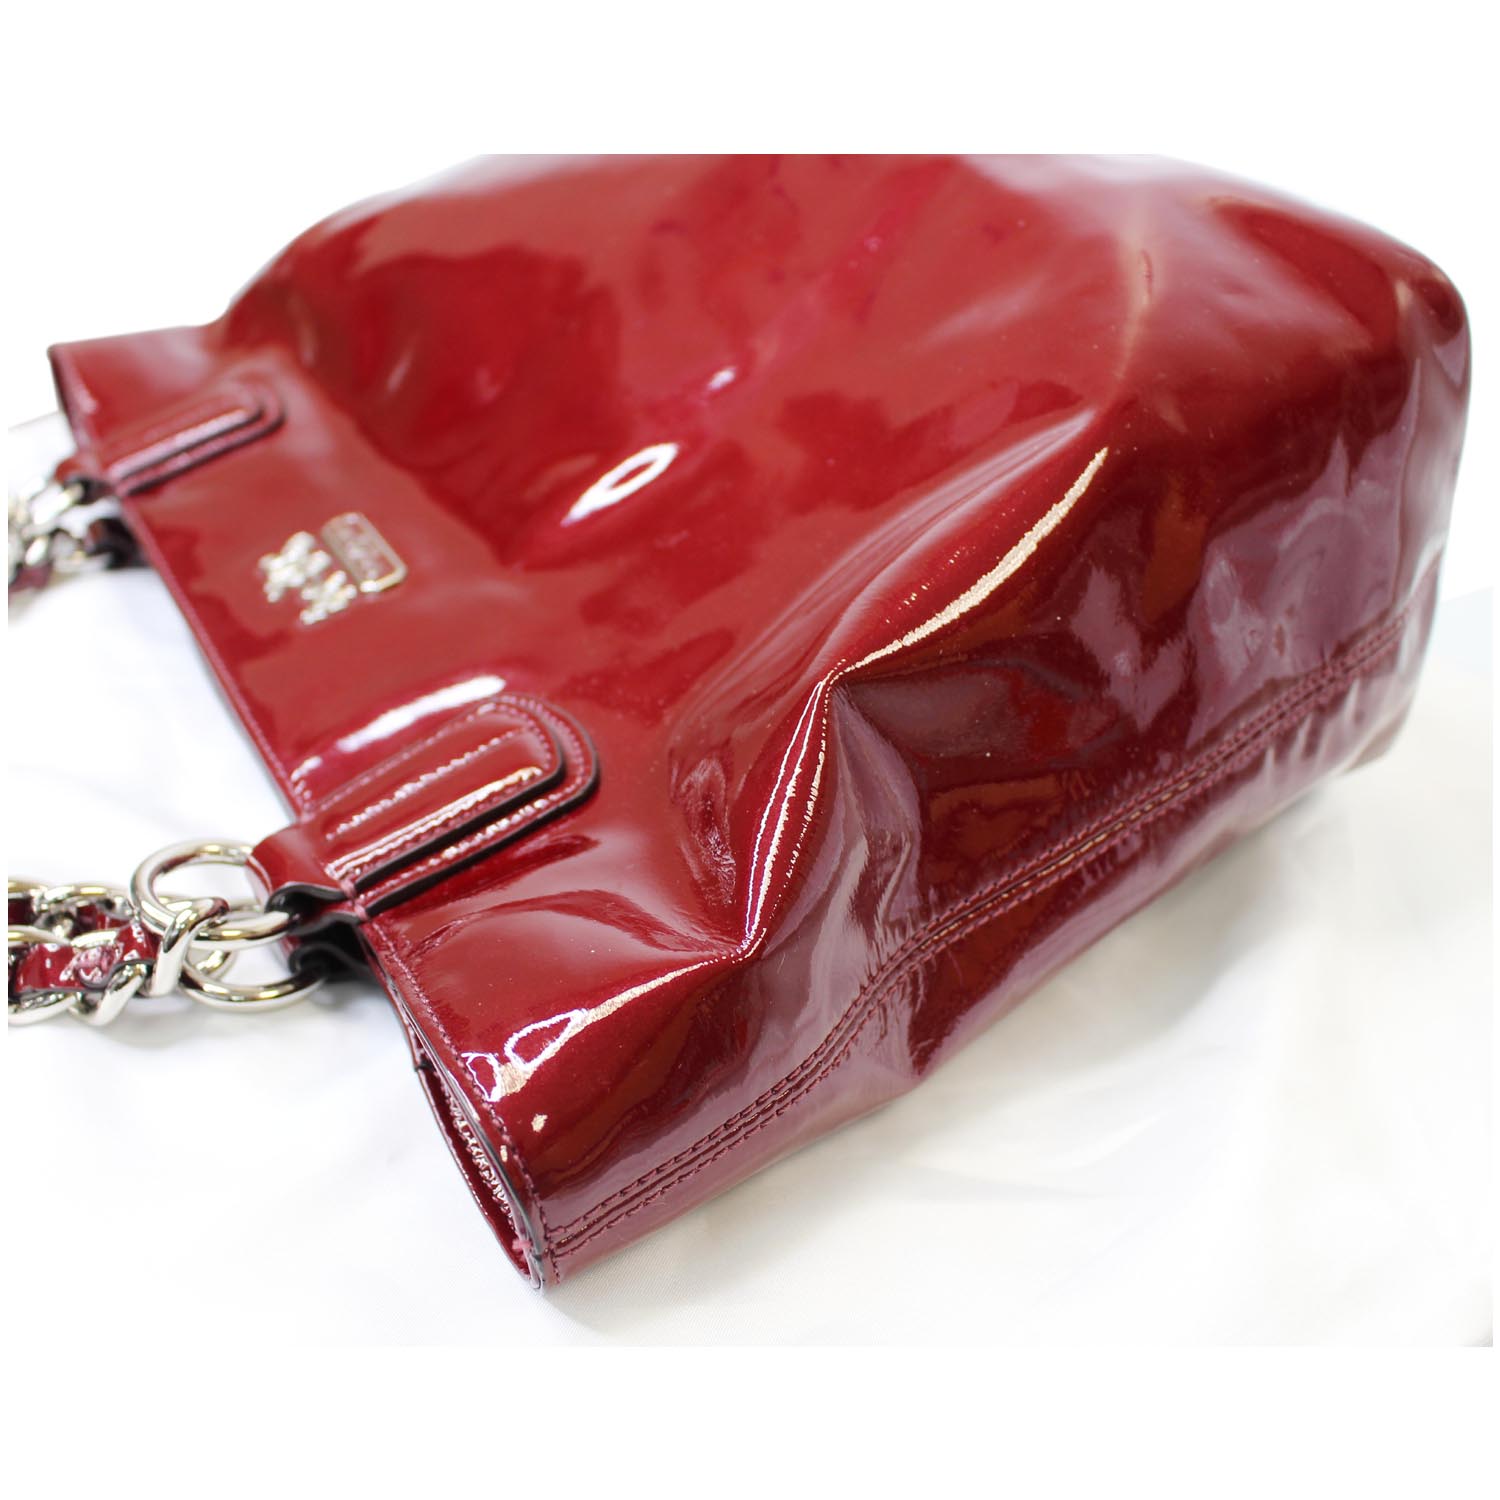 Emery Tote Red Patent Leather Tote Bag - Schandra